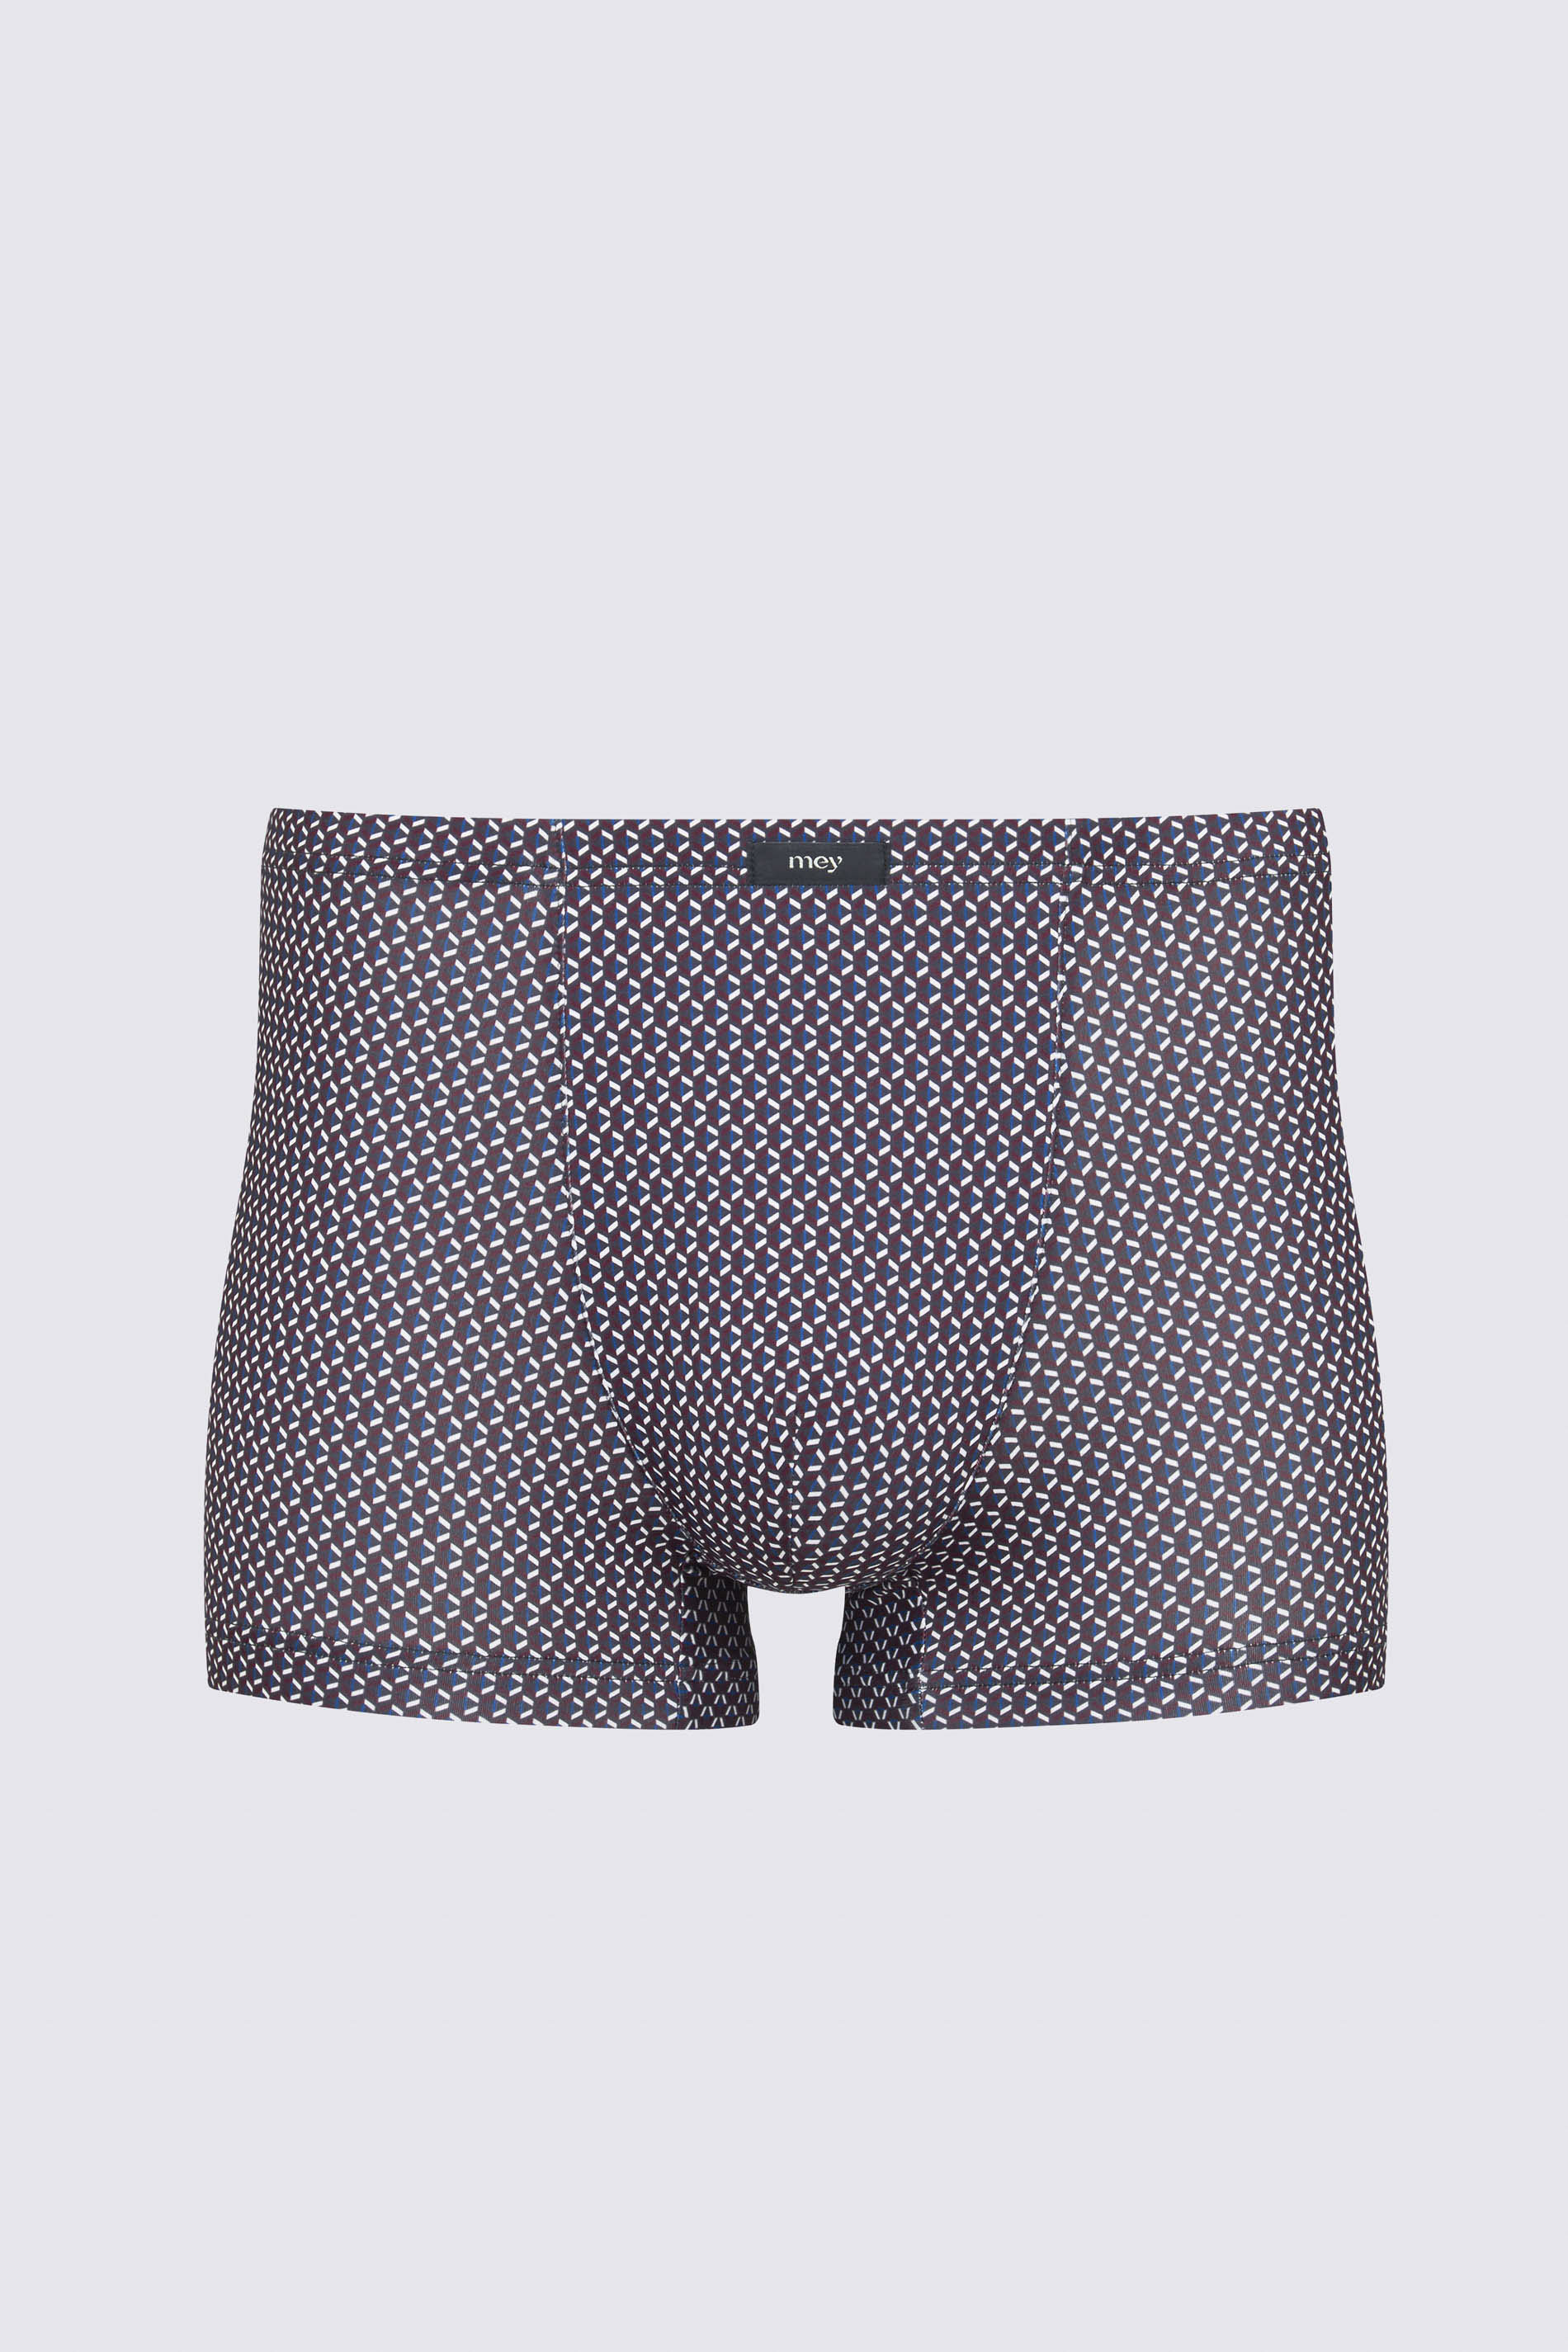 Shorty Stormy Grey Serie Geo Cut Out | mey®